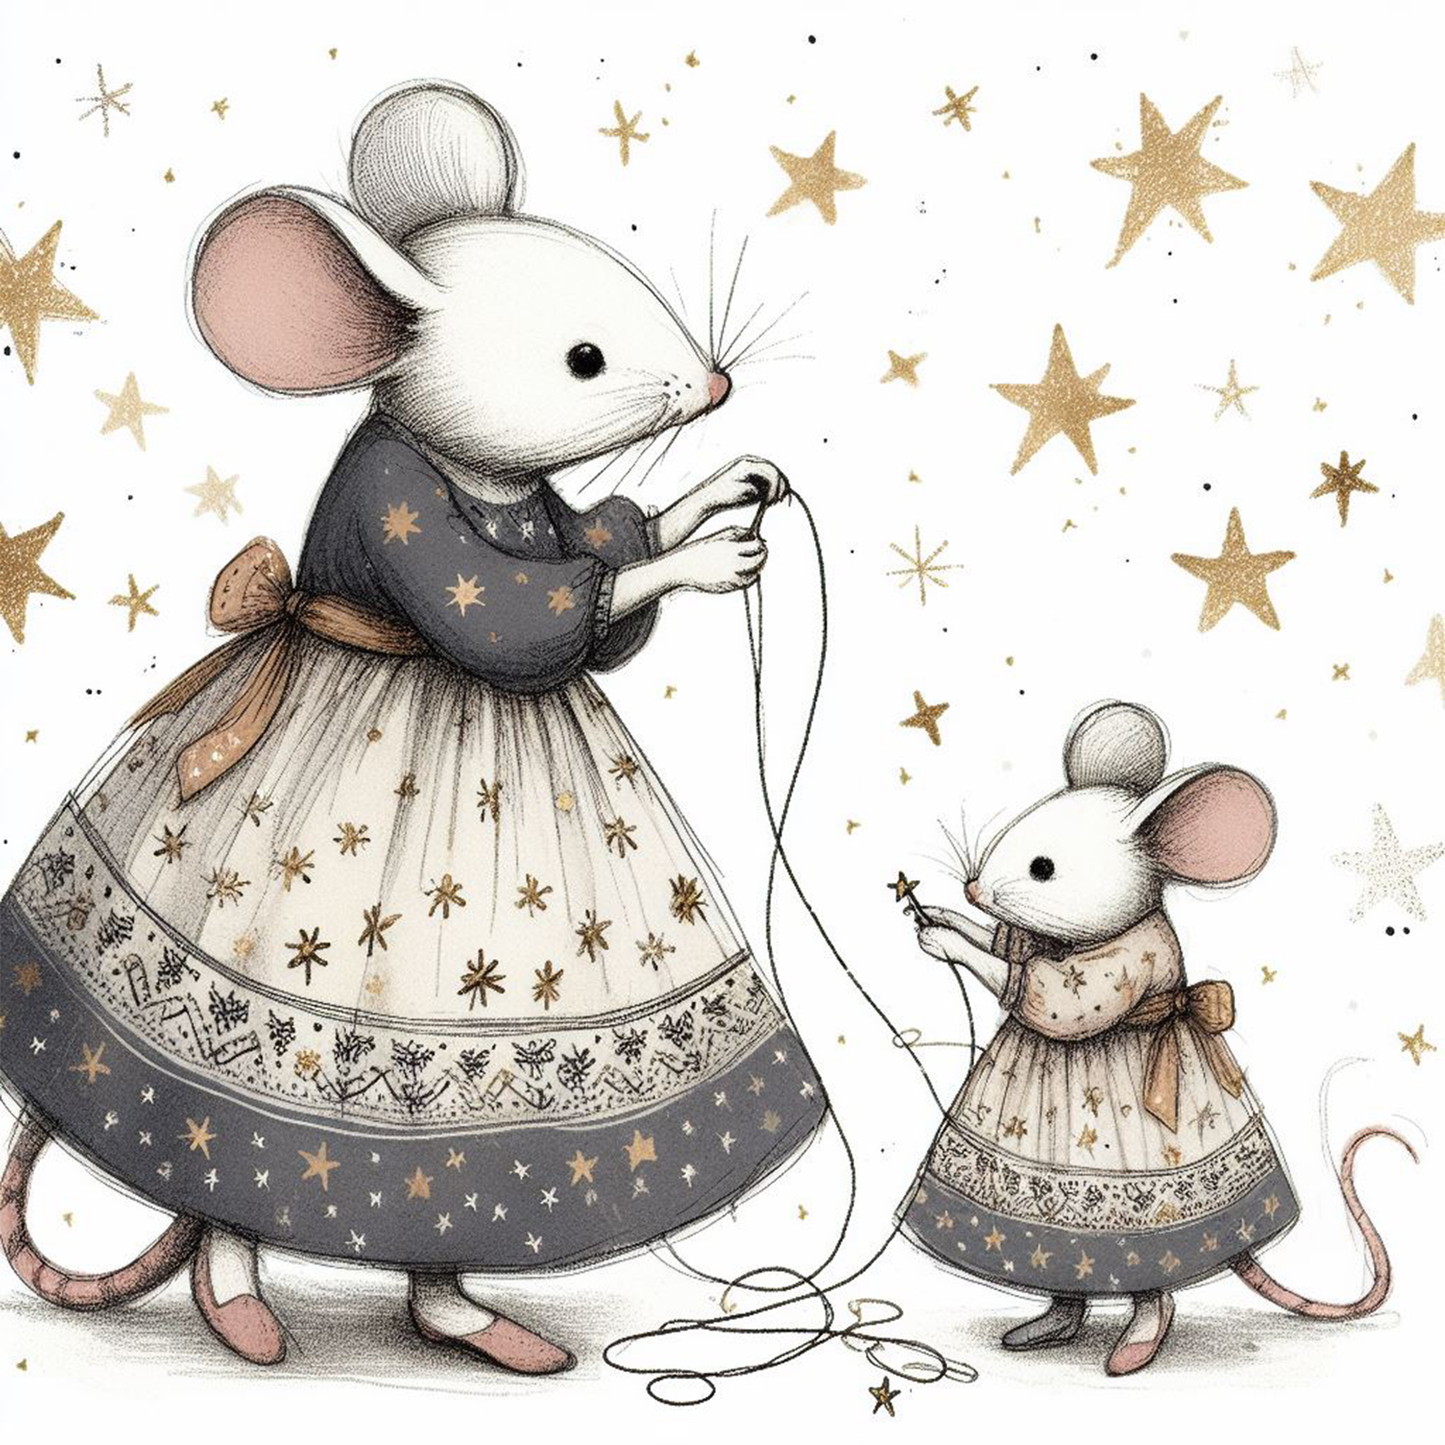 Stardust Mice Collection: Me, you and the stardust